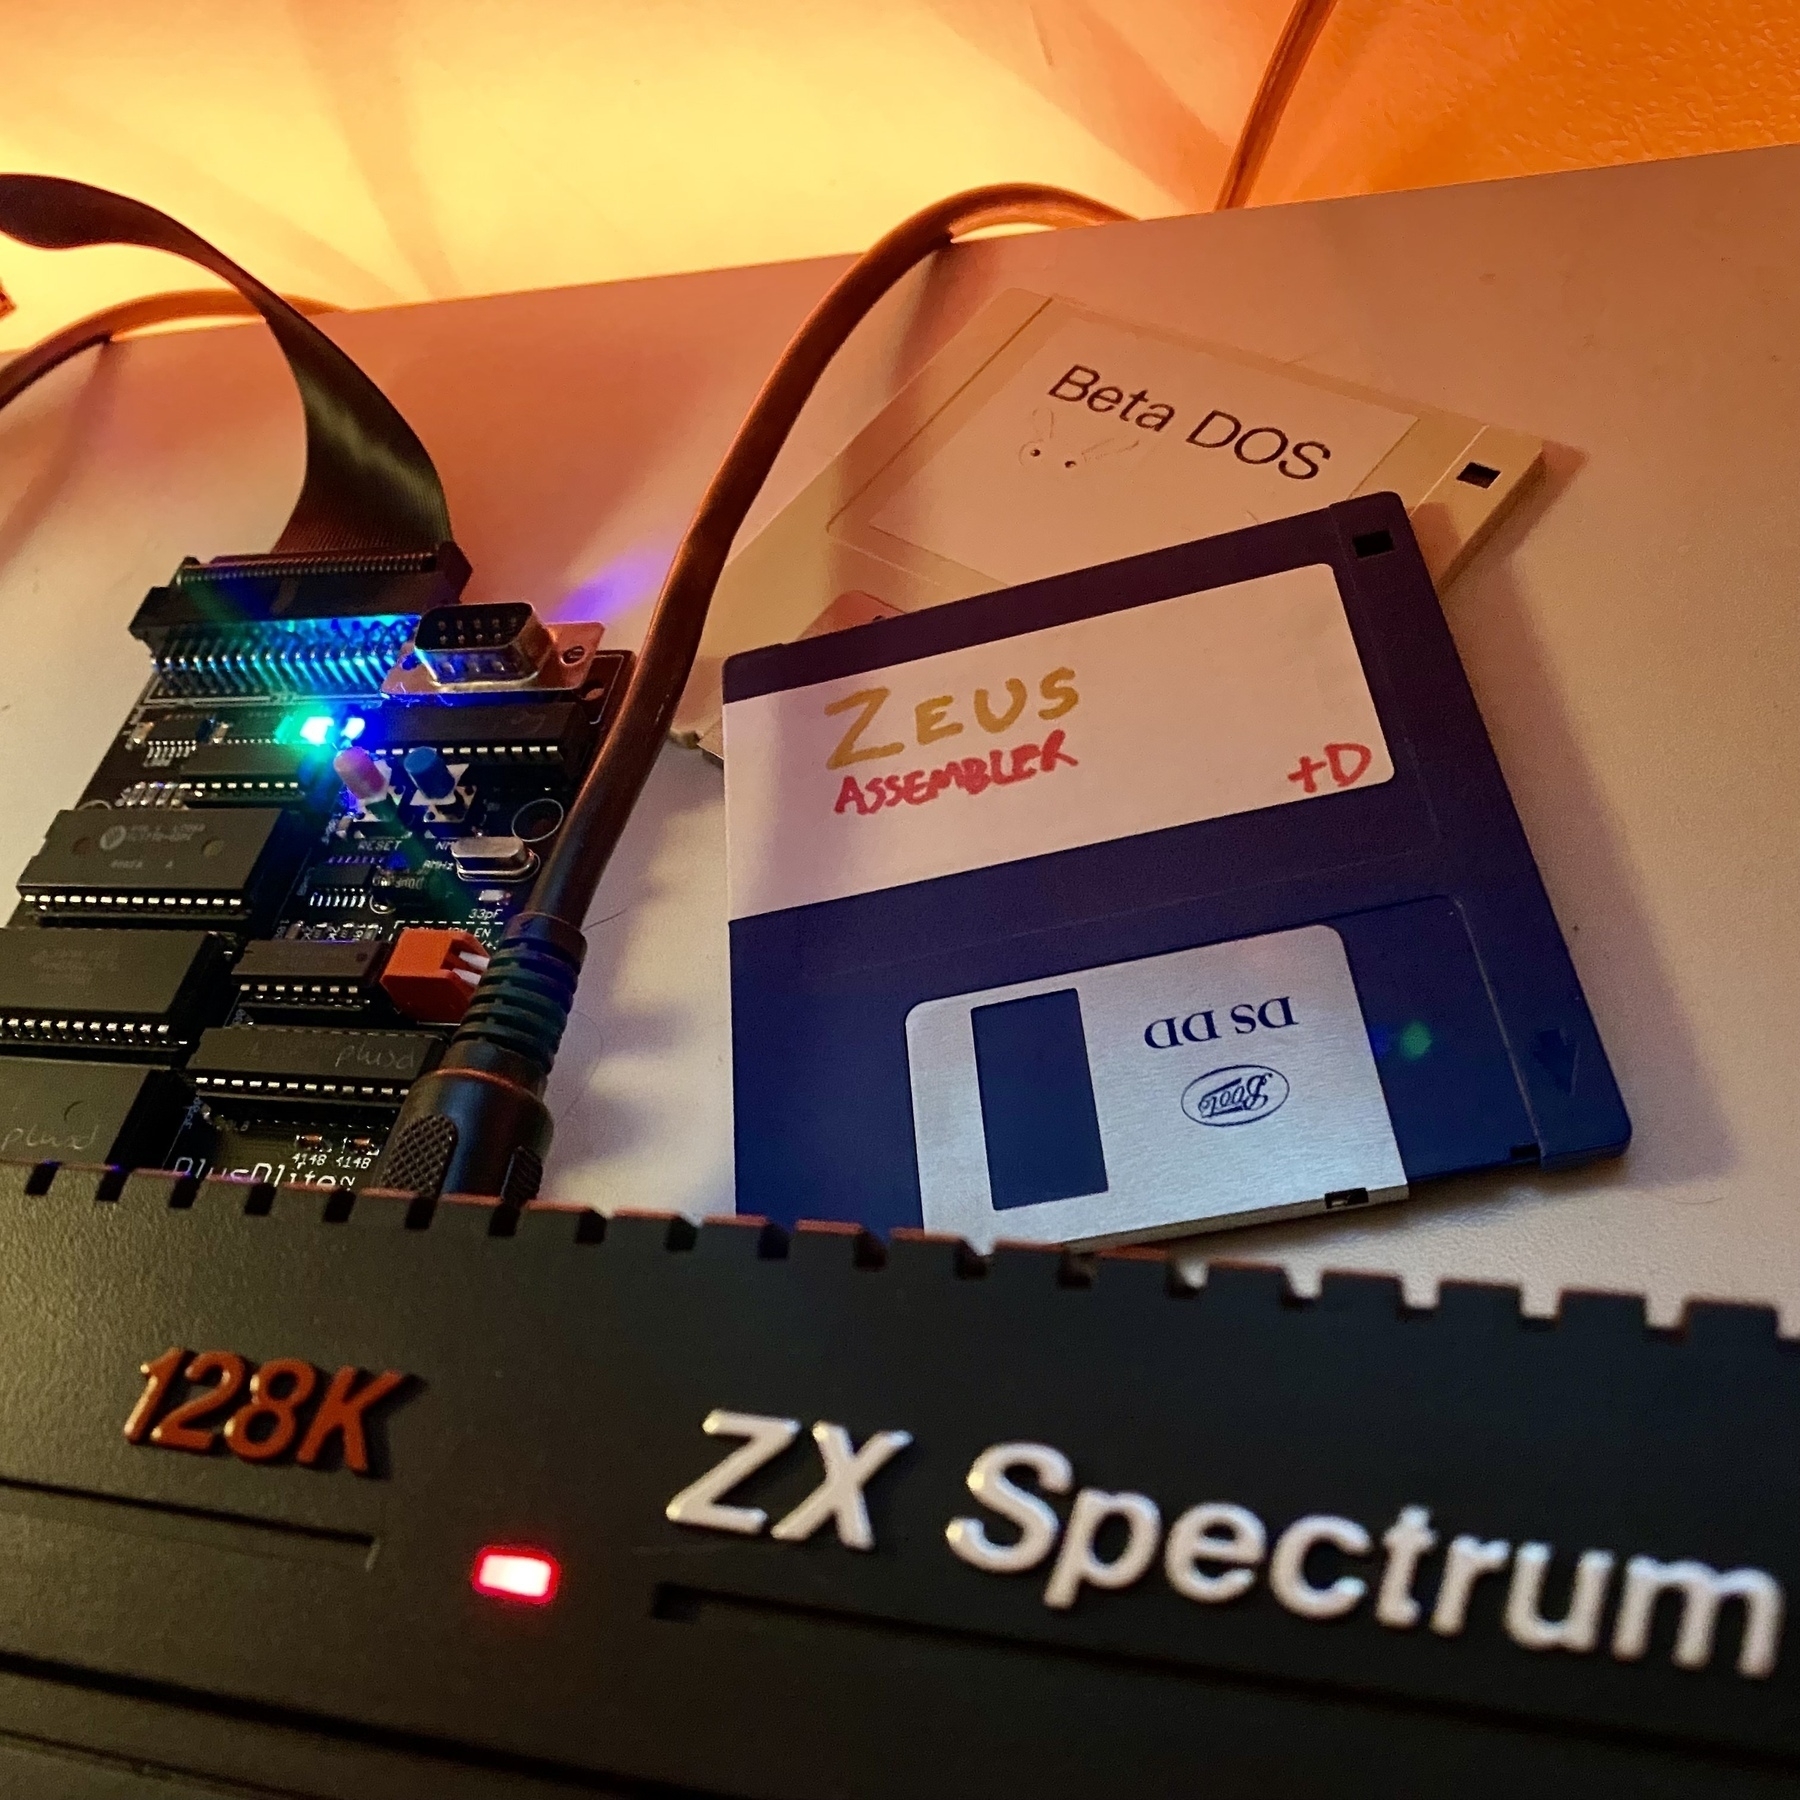 PlusDLite disk interface without its casing, plugged into a ZX Spectrum +2A. A couple of disks are scattered around with labels “Zeus Assembler” and Beta DOS”.